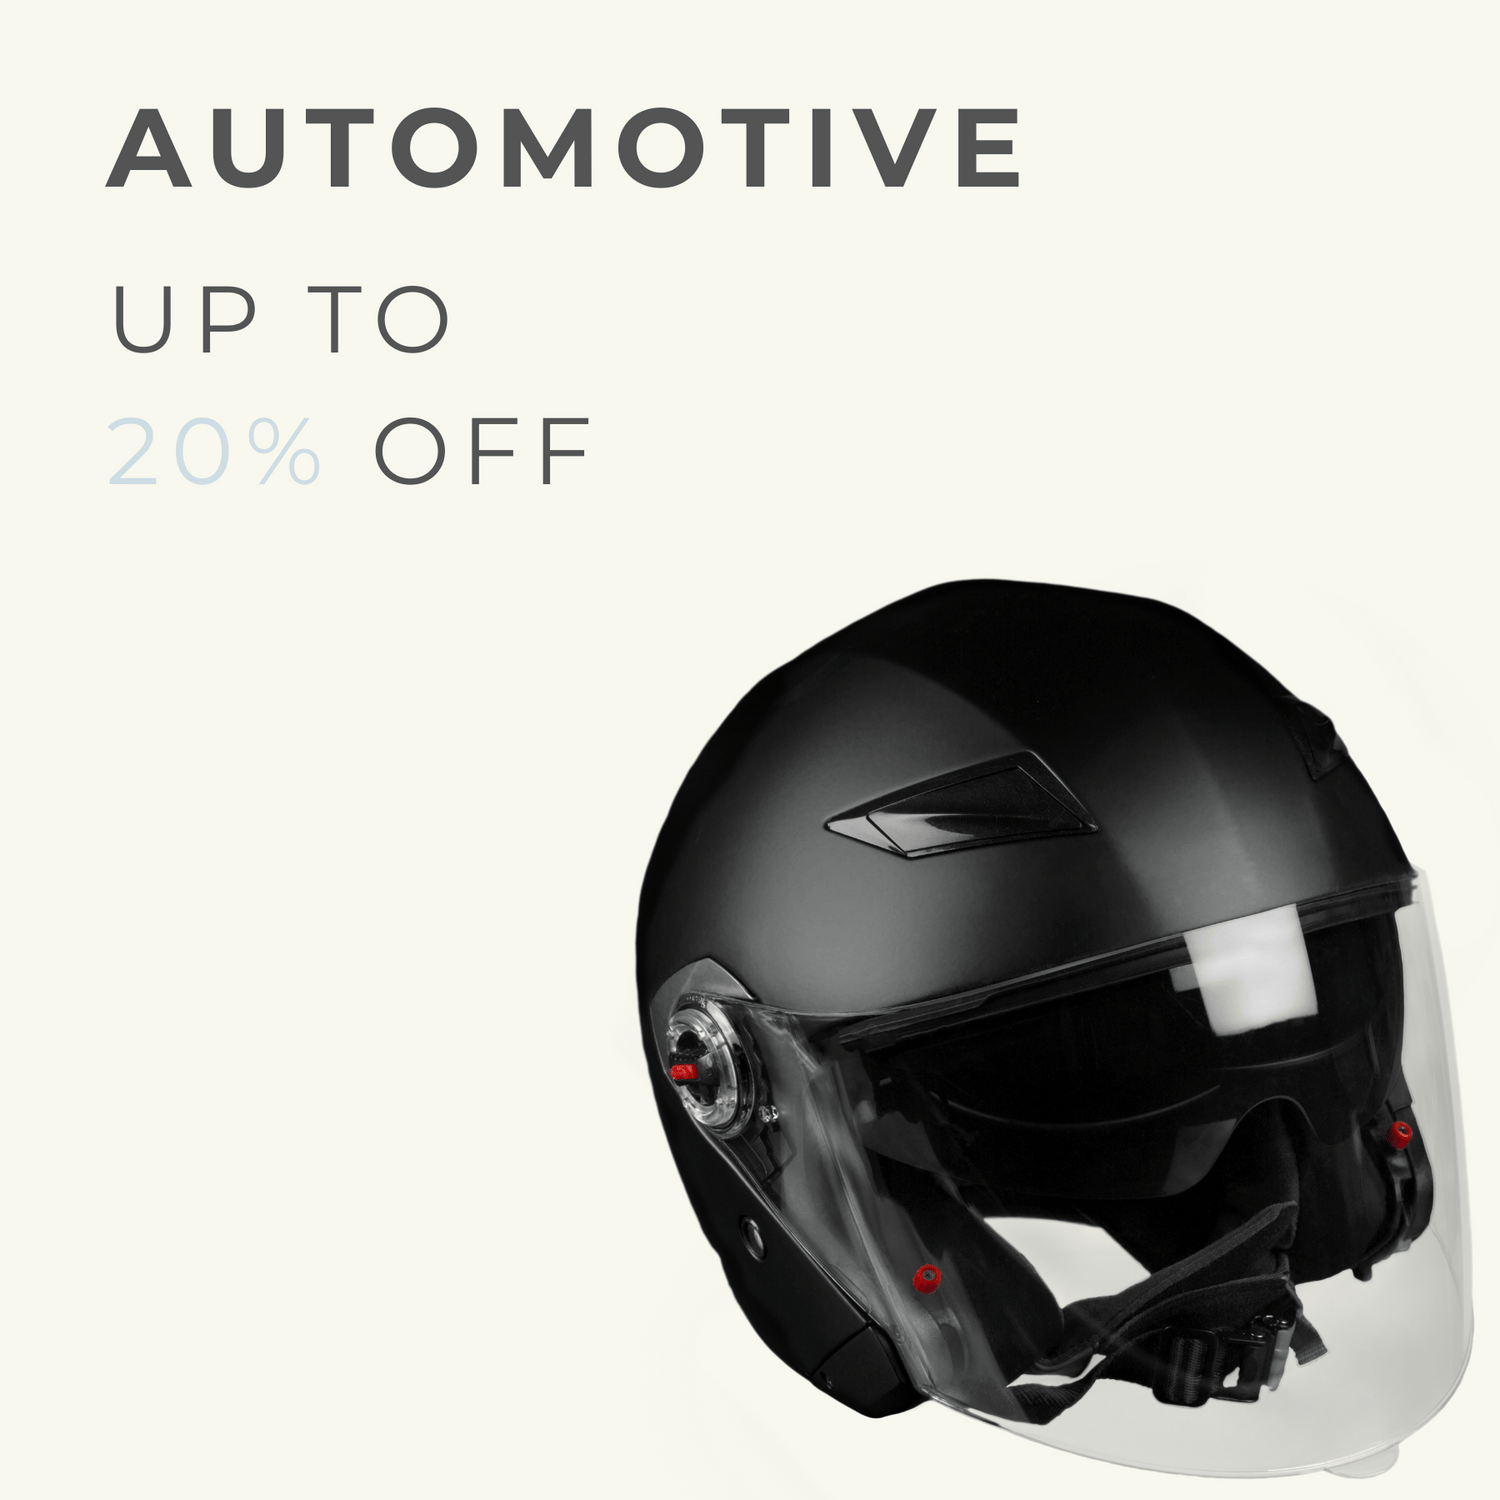 Modern black motorcycle helmet presented on a white background, with the promotion 'AUTOMOTIVE UP TO 20% OFF', advertising a discount on automotive gear and accessories.